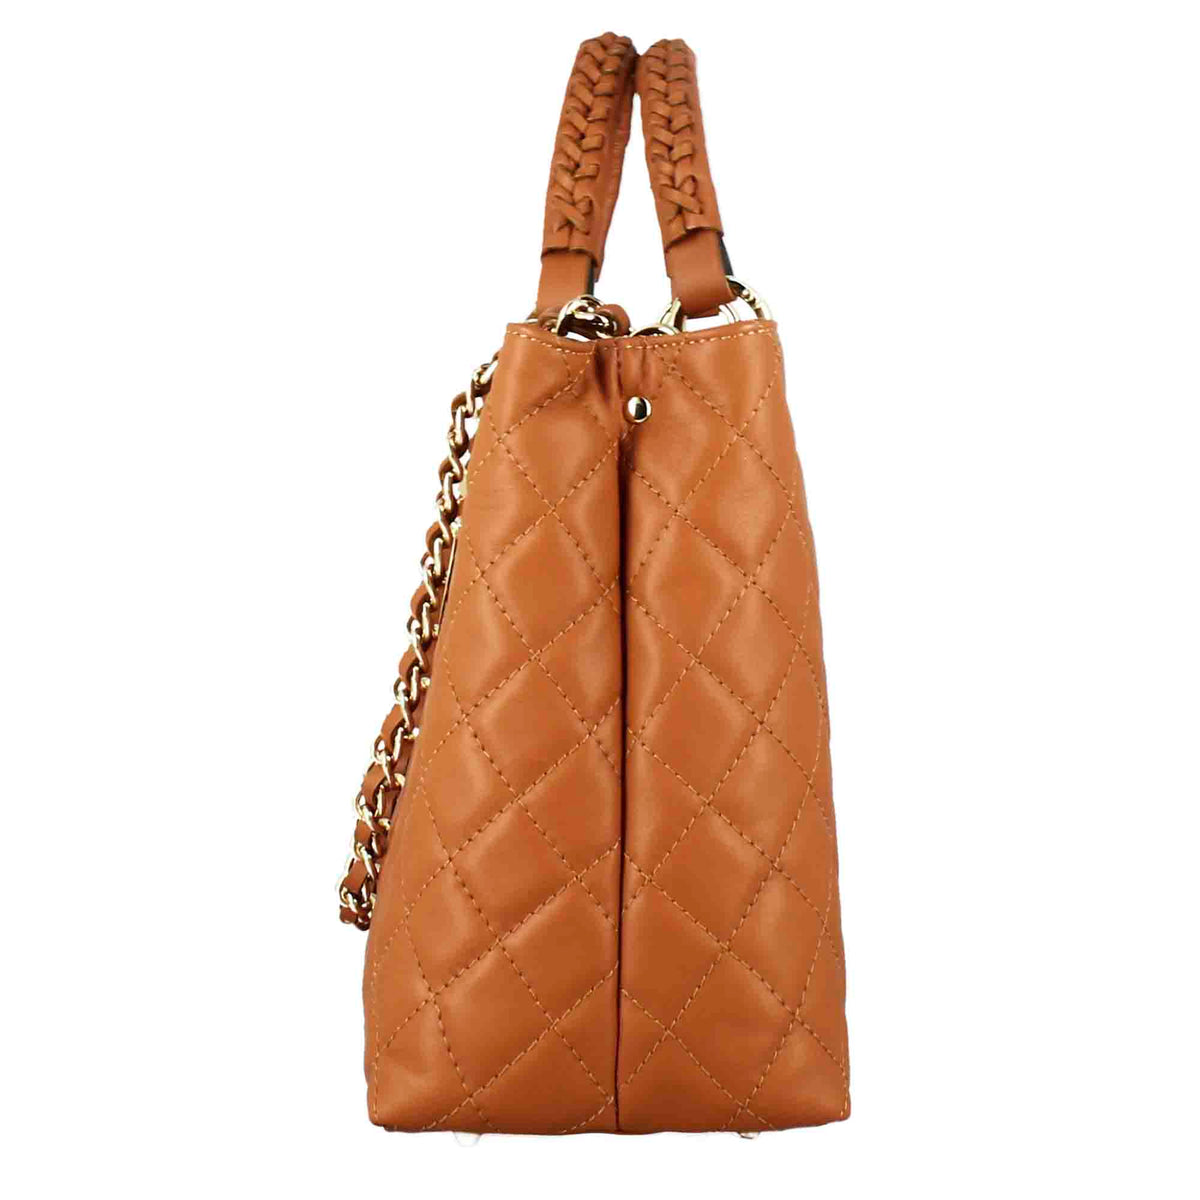 Vanity shopper bag with shoulder strap in brown quilted leather